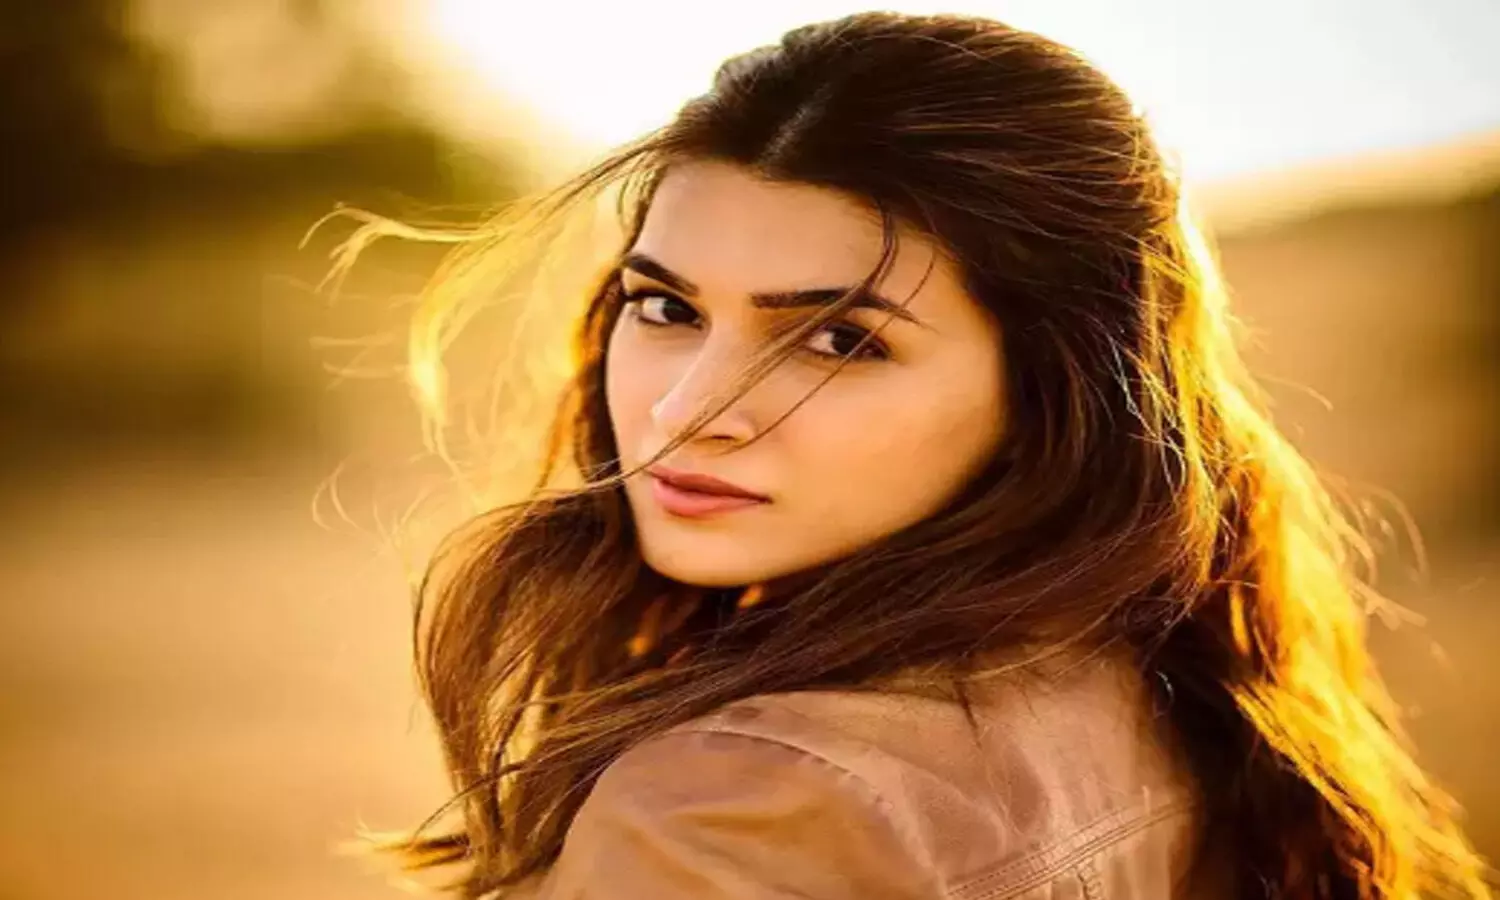 What breaks us also unites us: Kriti Sanon on people helping out amid COVID